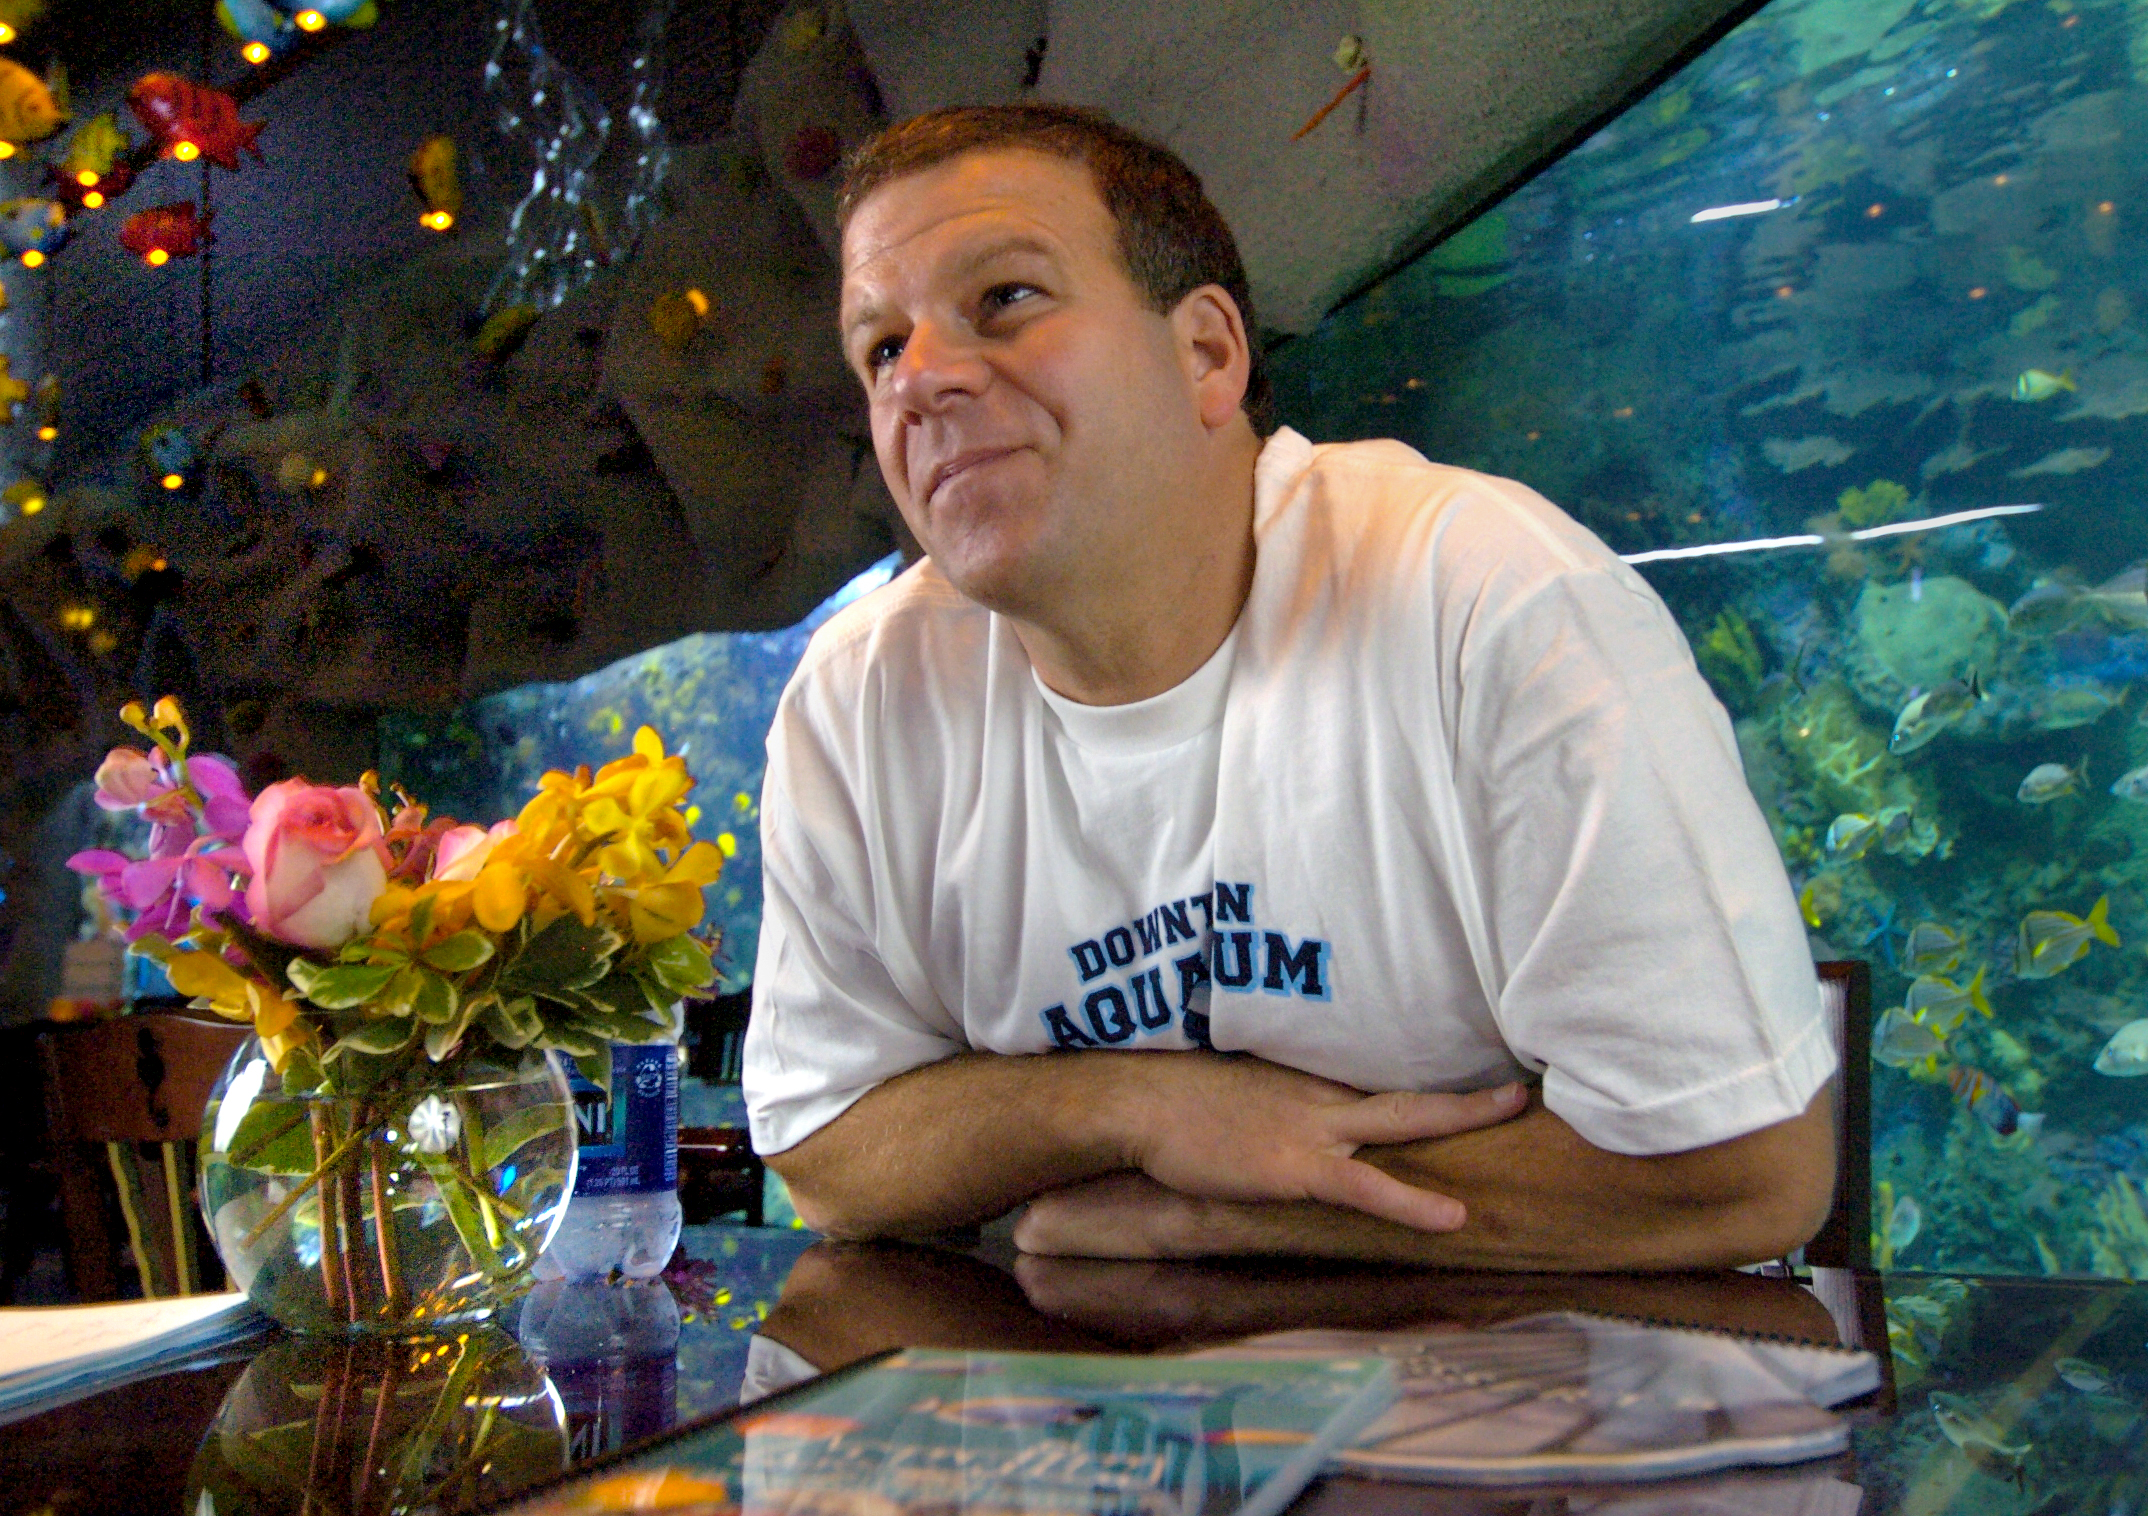 DENVER, COLO. - JULY 13, 2005 - Tilman Fertitta, CEO of Landry's Restaurants Inc., at the newly-remodeled Downtown Aquarium, Wednesday afternoon, 7/13/2005. The aquarium, formerly known as Colorado's Ocean Journey, reopens to the public Thursday,